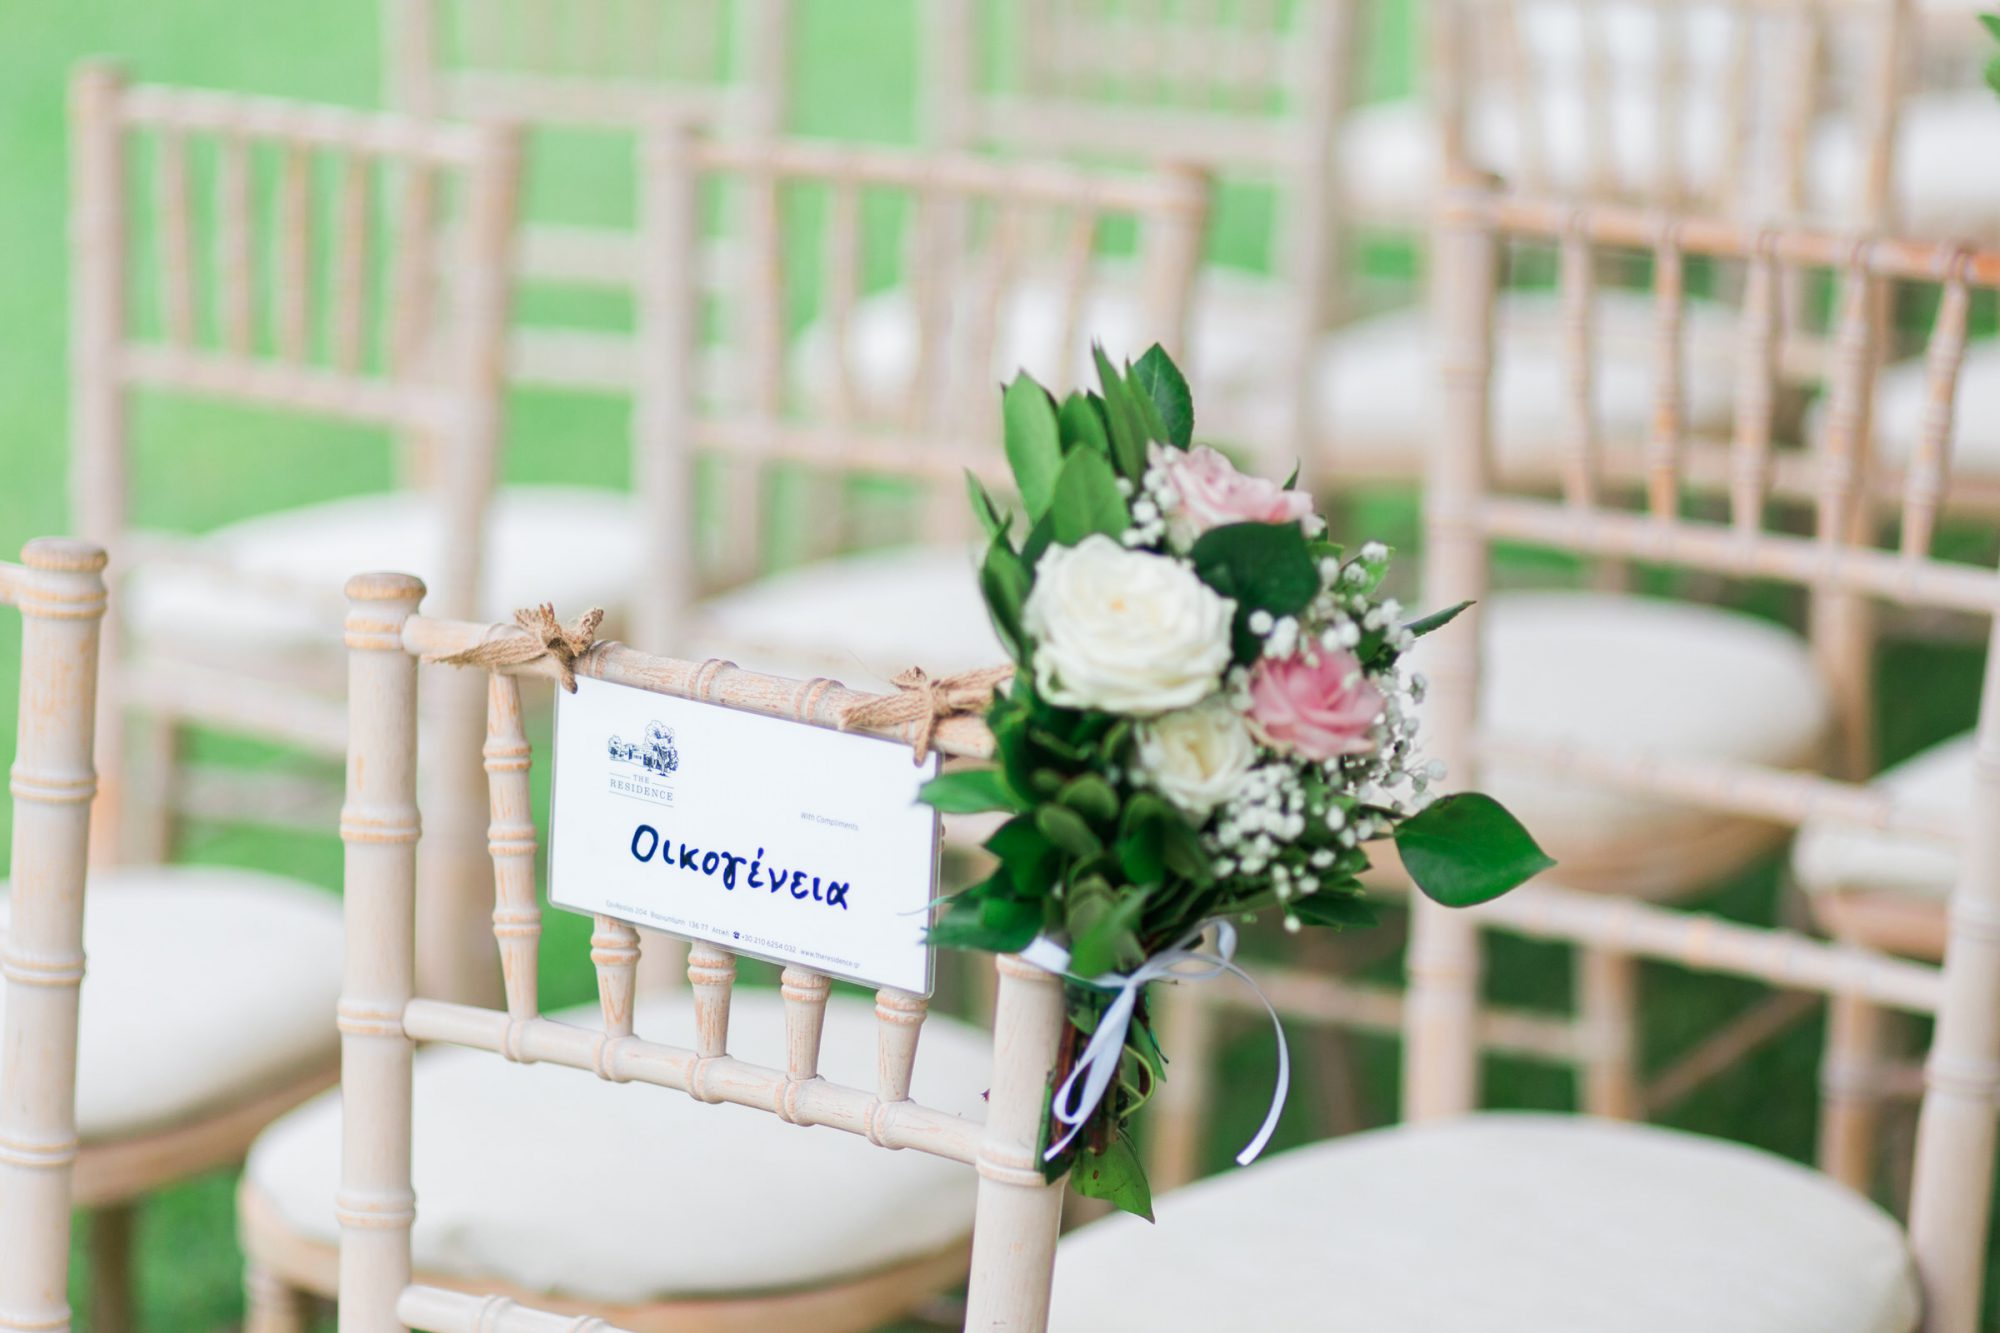 Chic romantic wedding with roses at The Residence